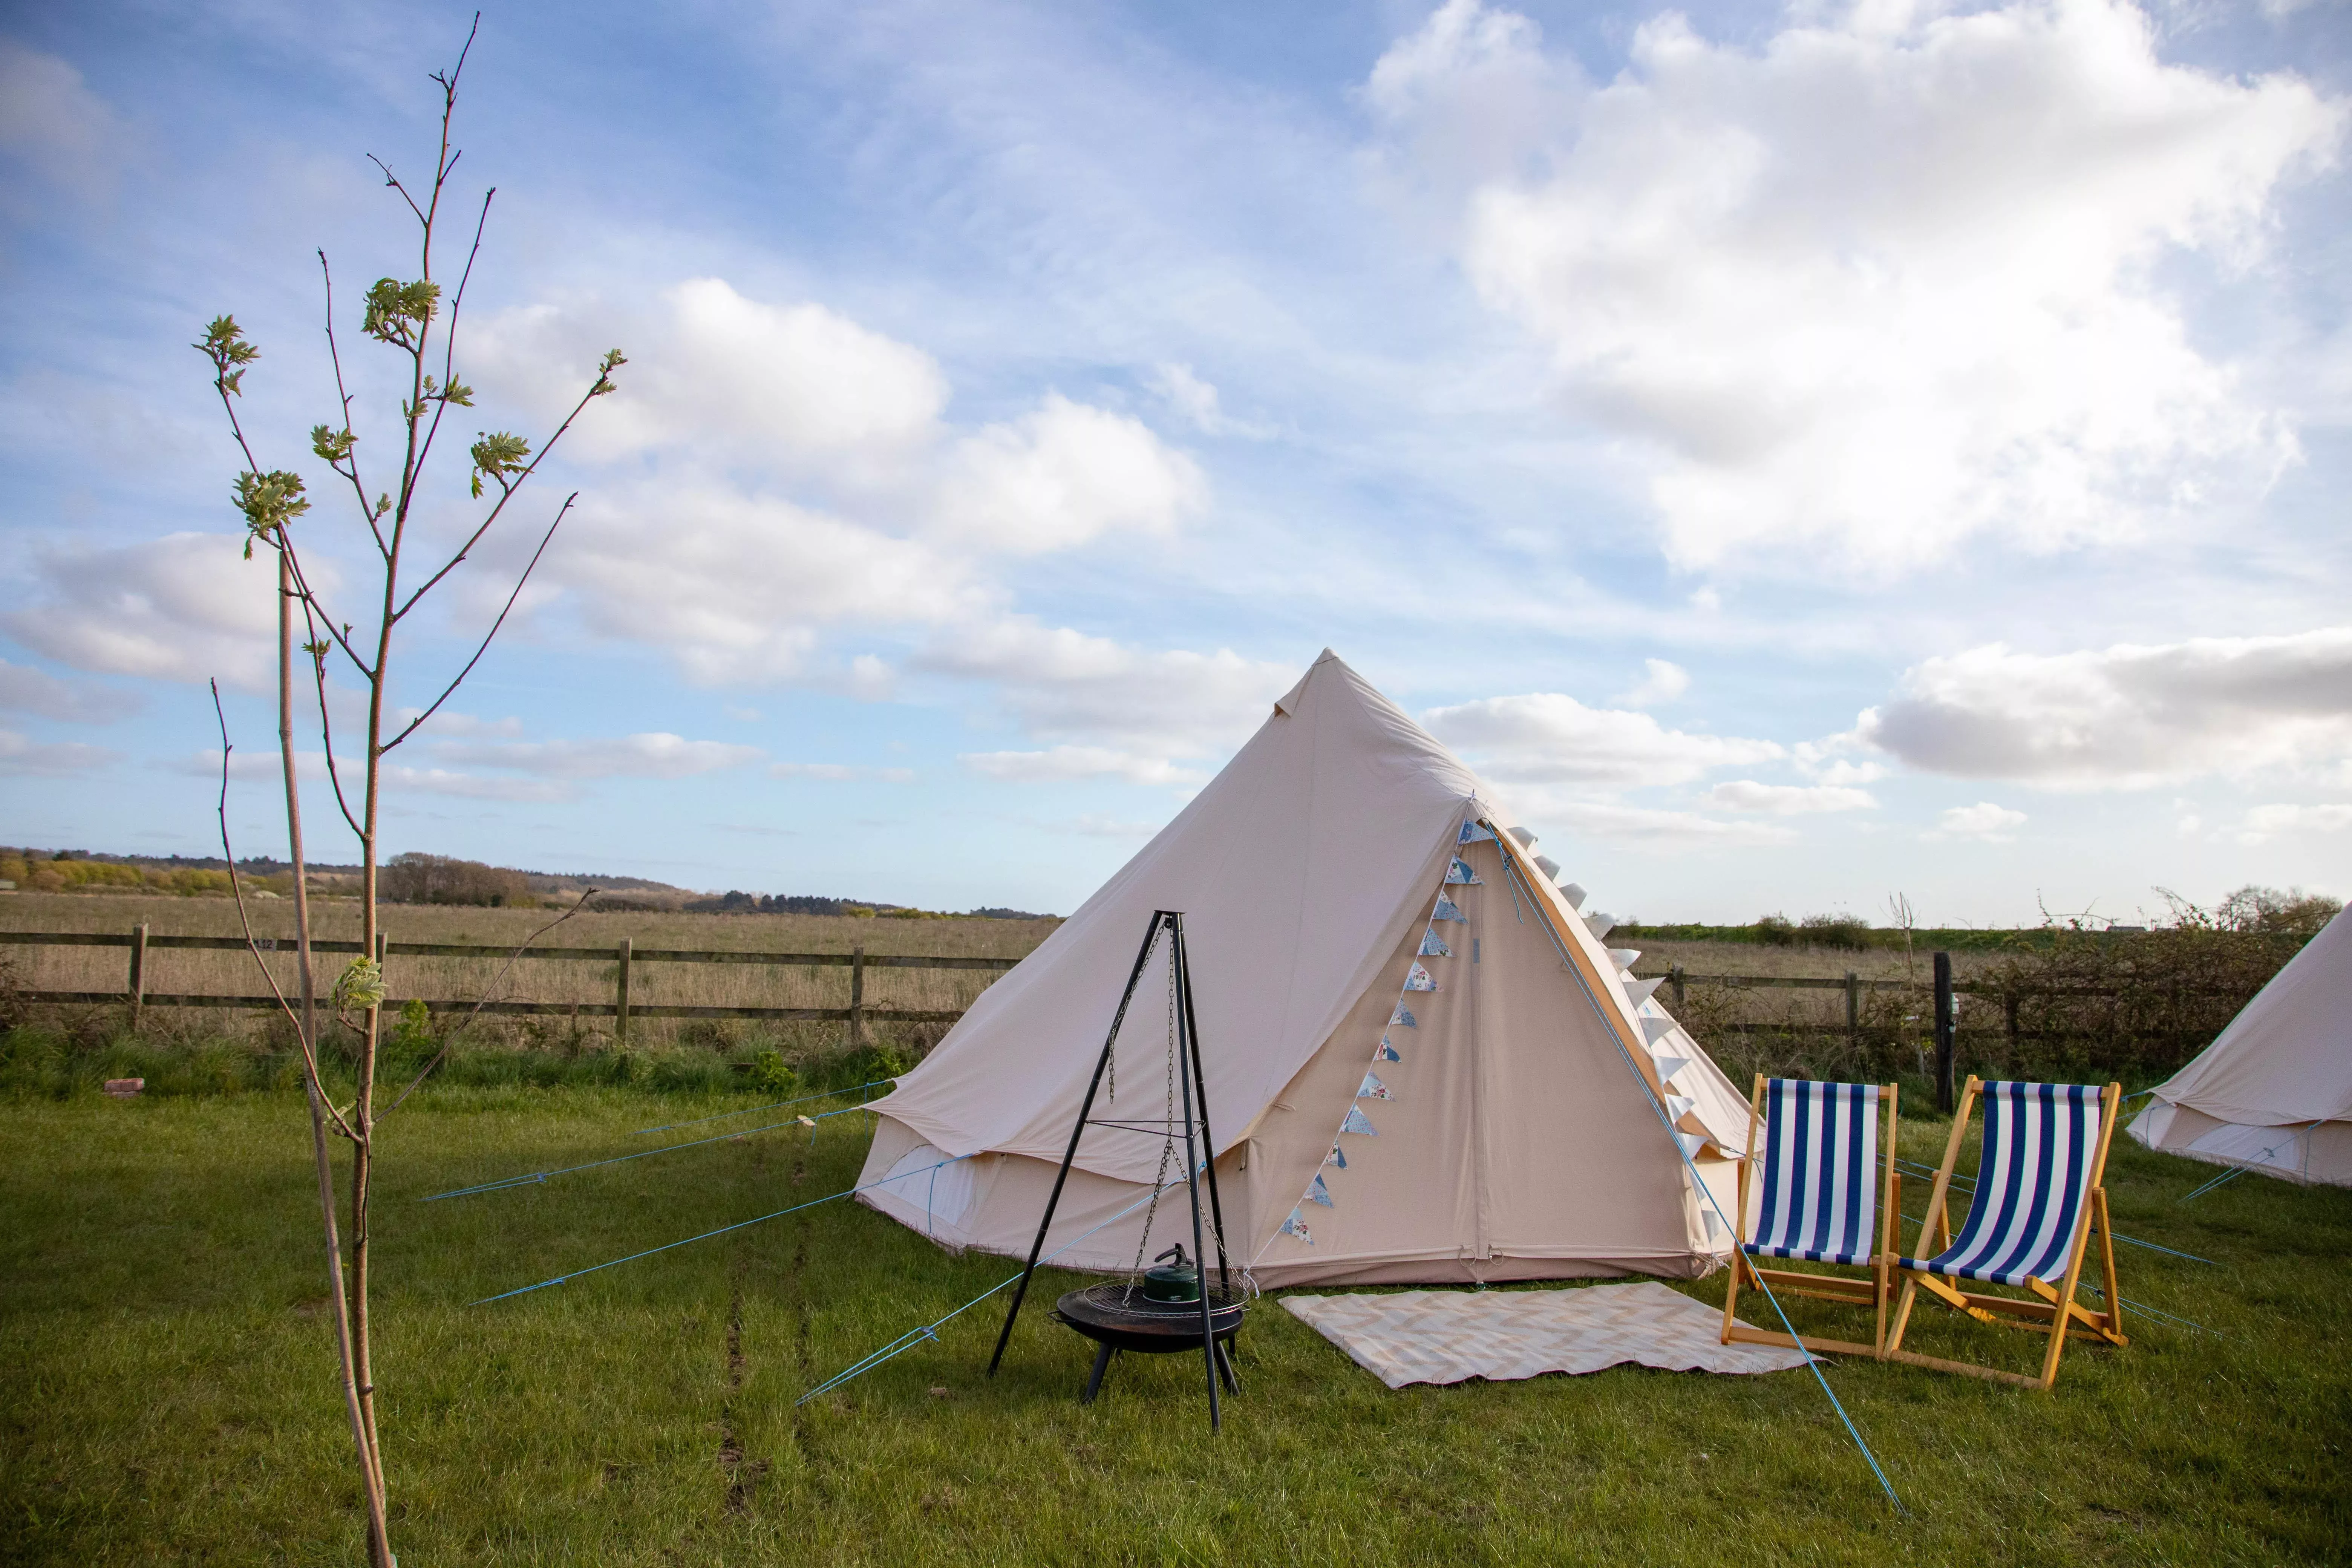 A Bell tent in wells with beautiful scenery, outdoor seating and a campfire